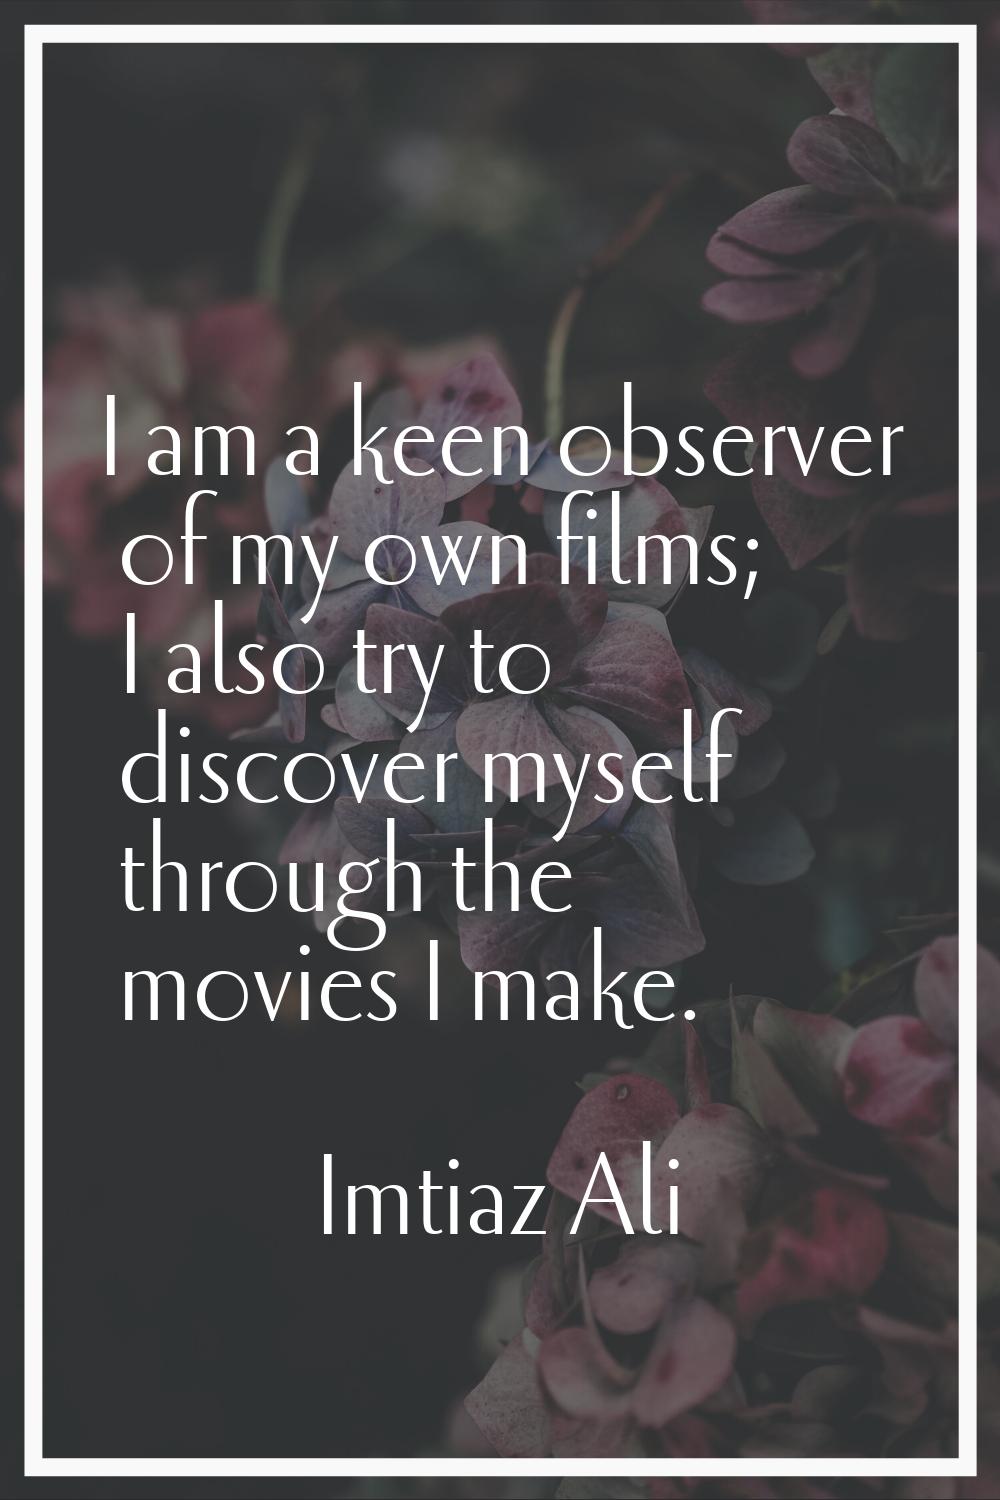 I am a keen observer of my own films; I also try to discover myself through the movies I make.